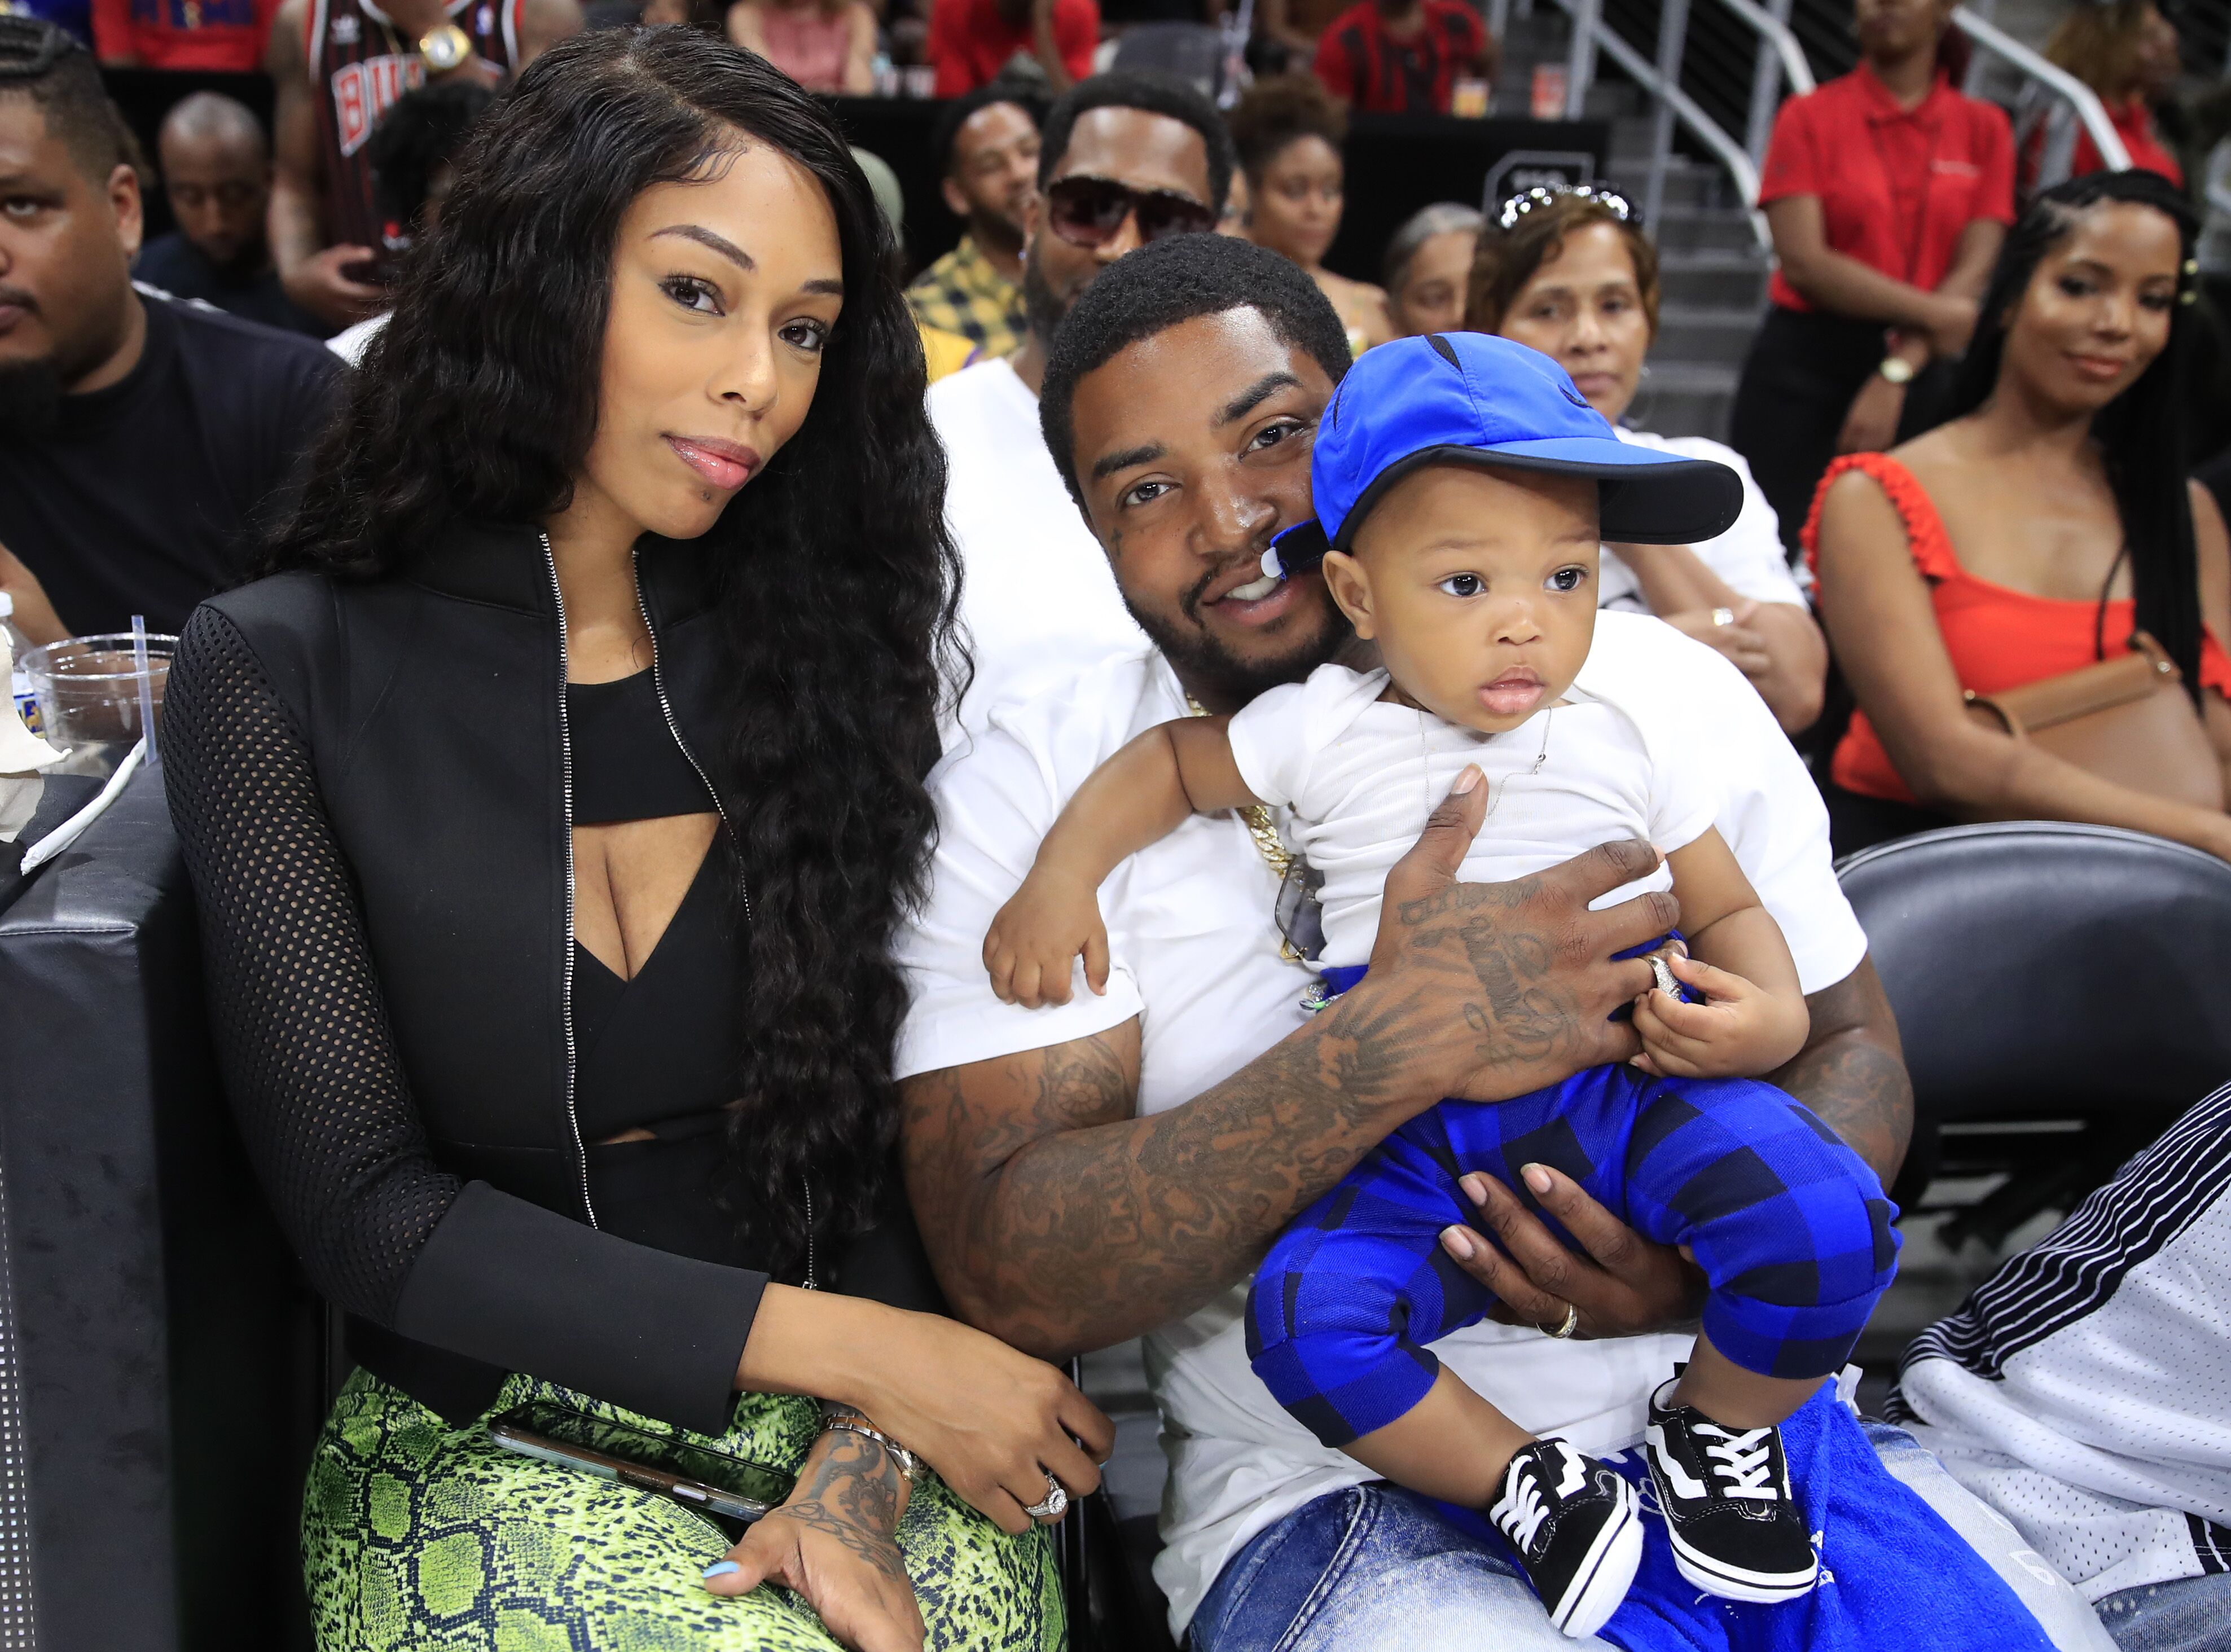 Bambi, Lil Scrappy, and their baby Breland attend the game between Power and Trilogy at State Farm Arena on July 07, 2019 in Atlanta, Georgia. | Photo: Getty Images